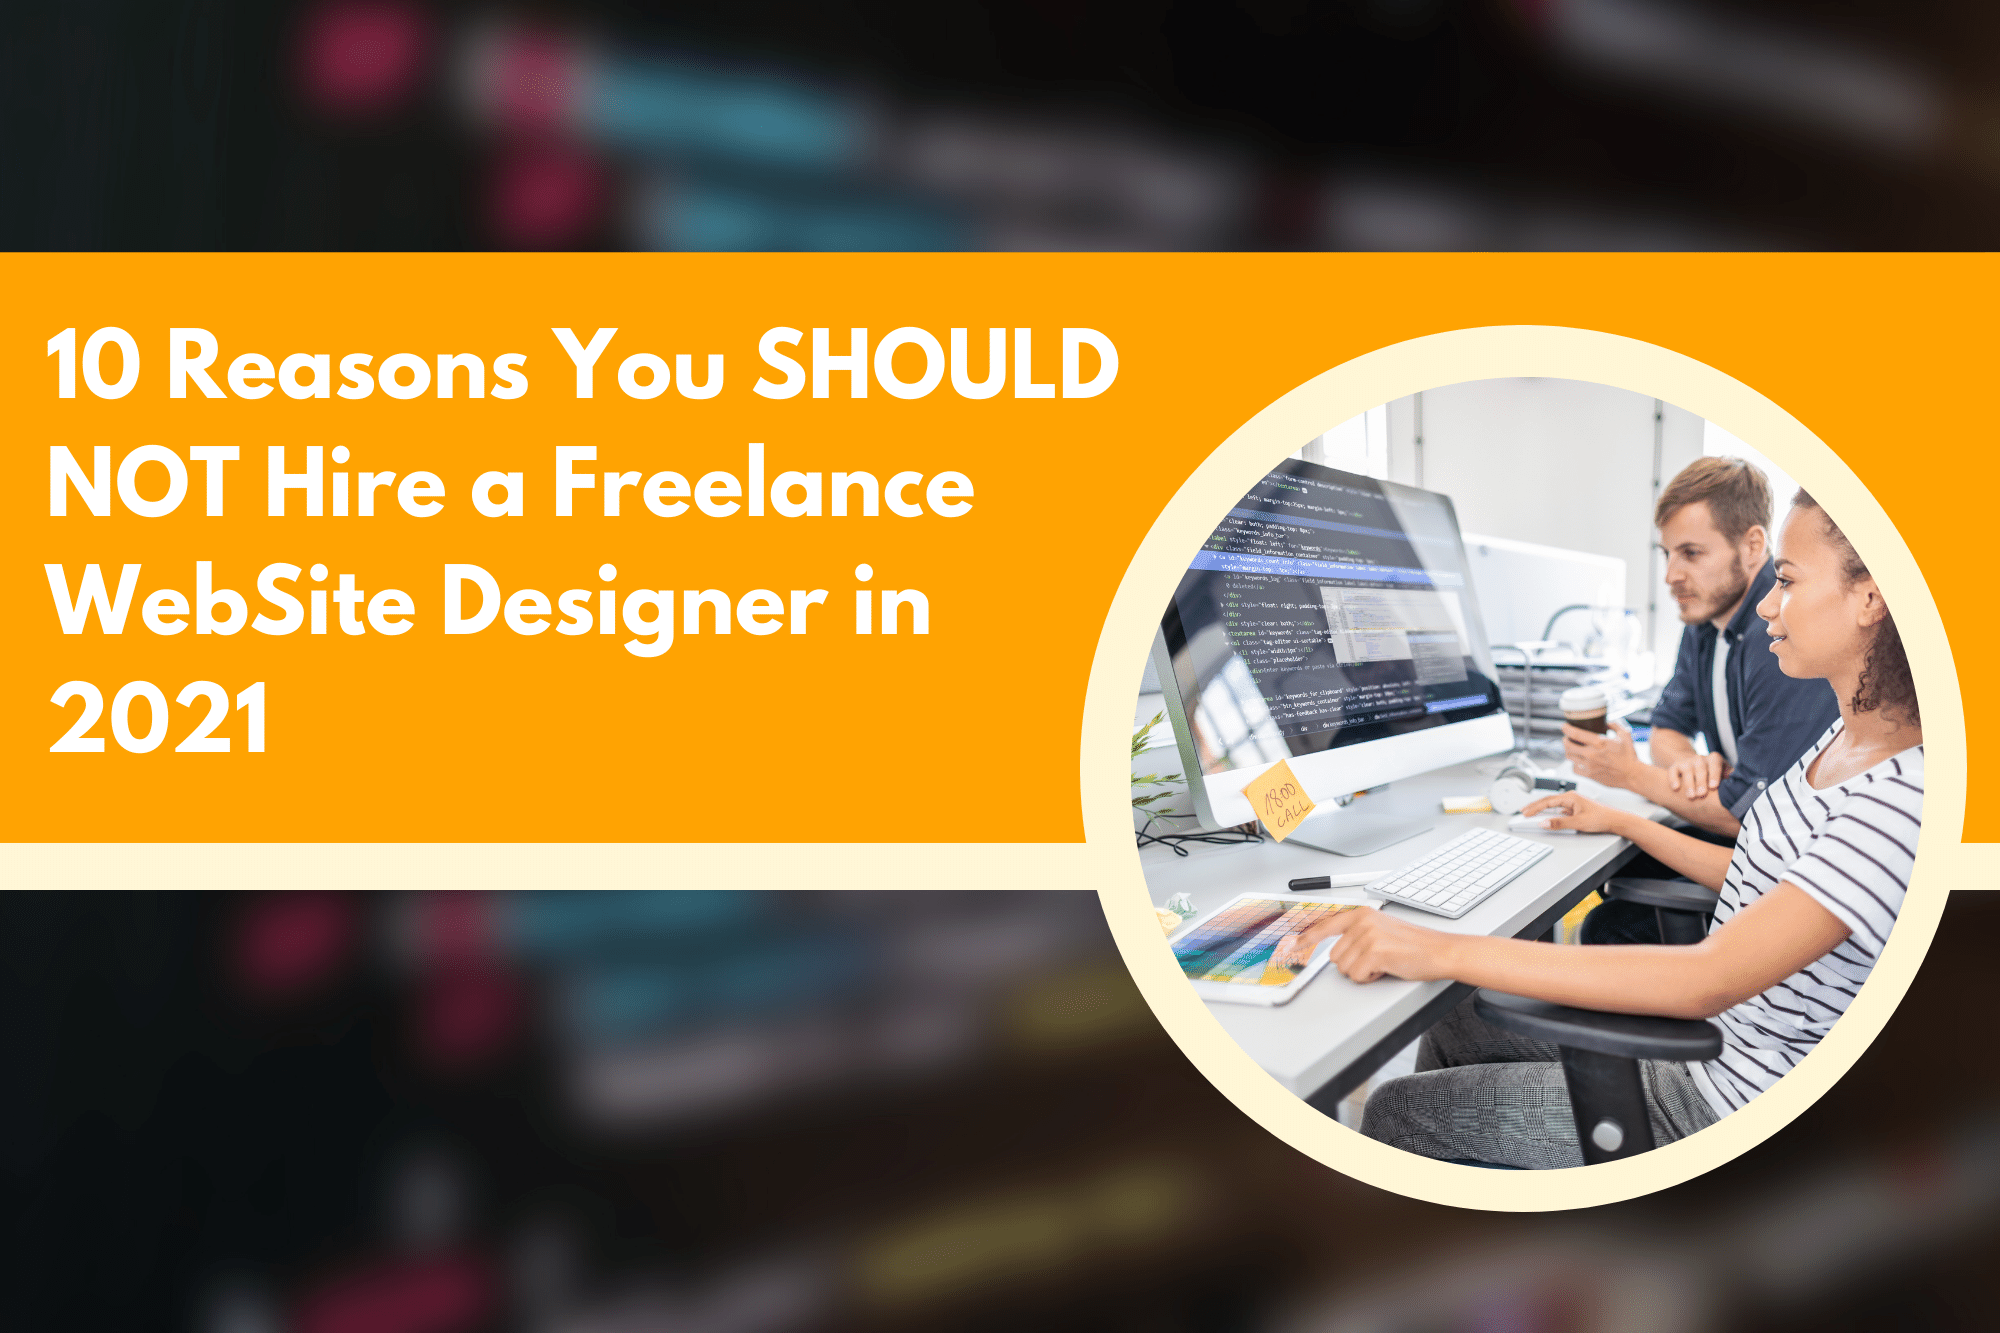 10 Reasons You SHOULD NOT Hire a Freelance WebSite Designer in 2021